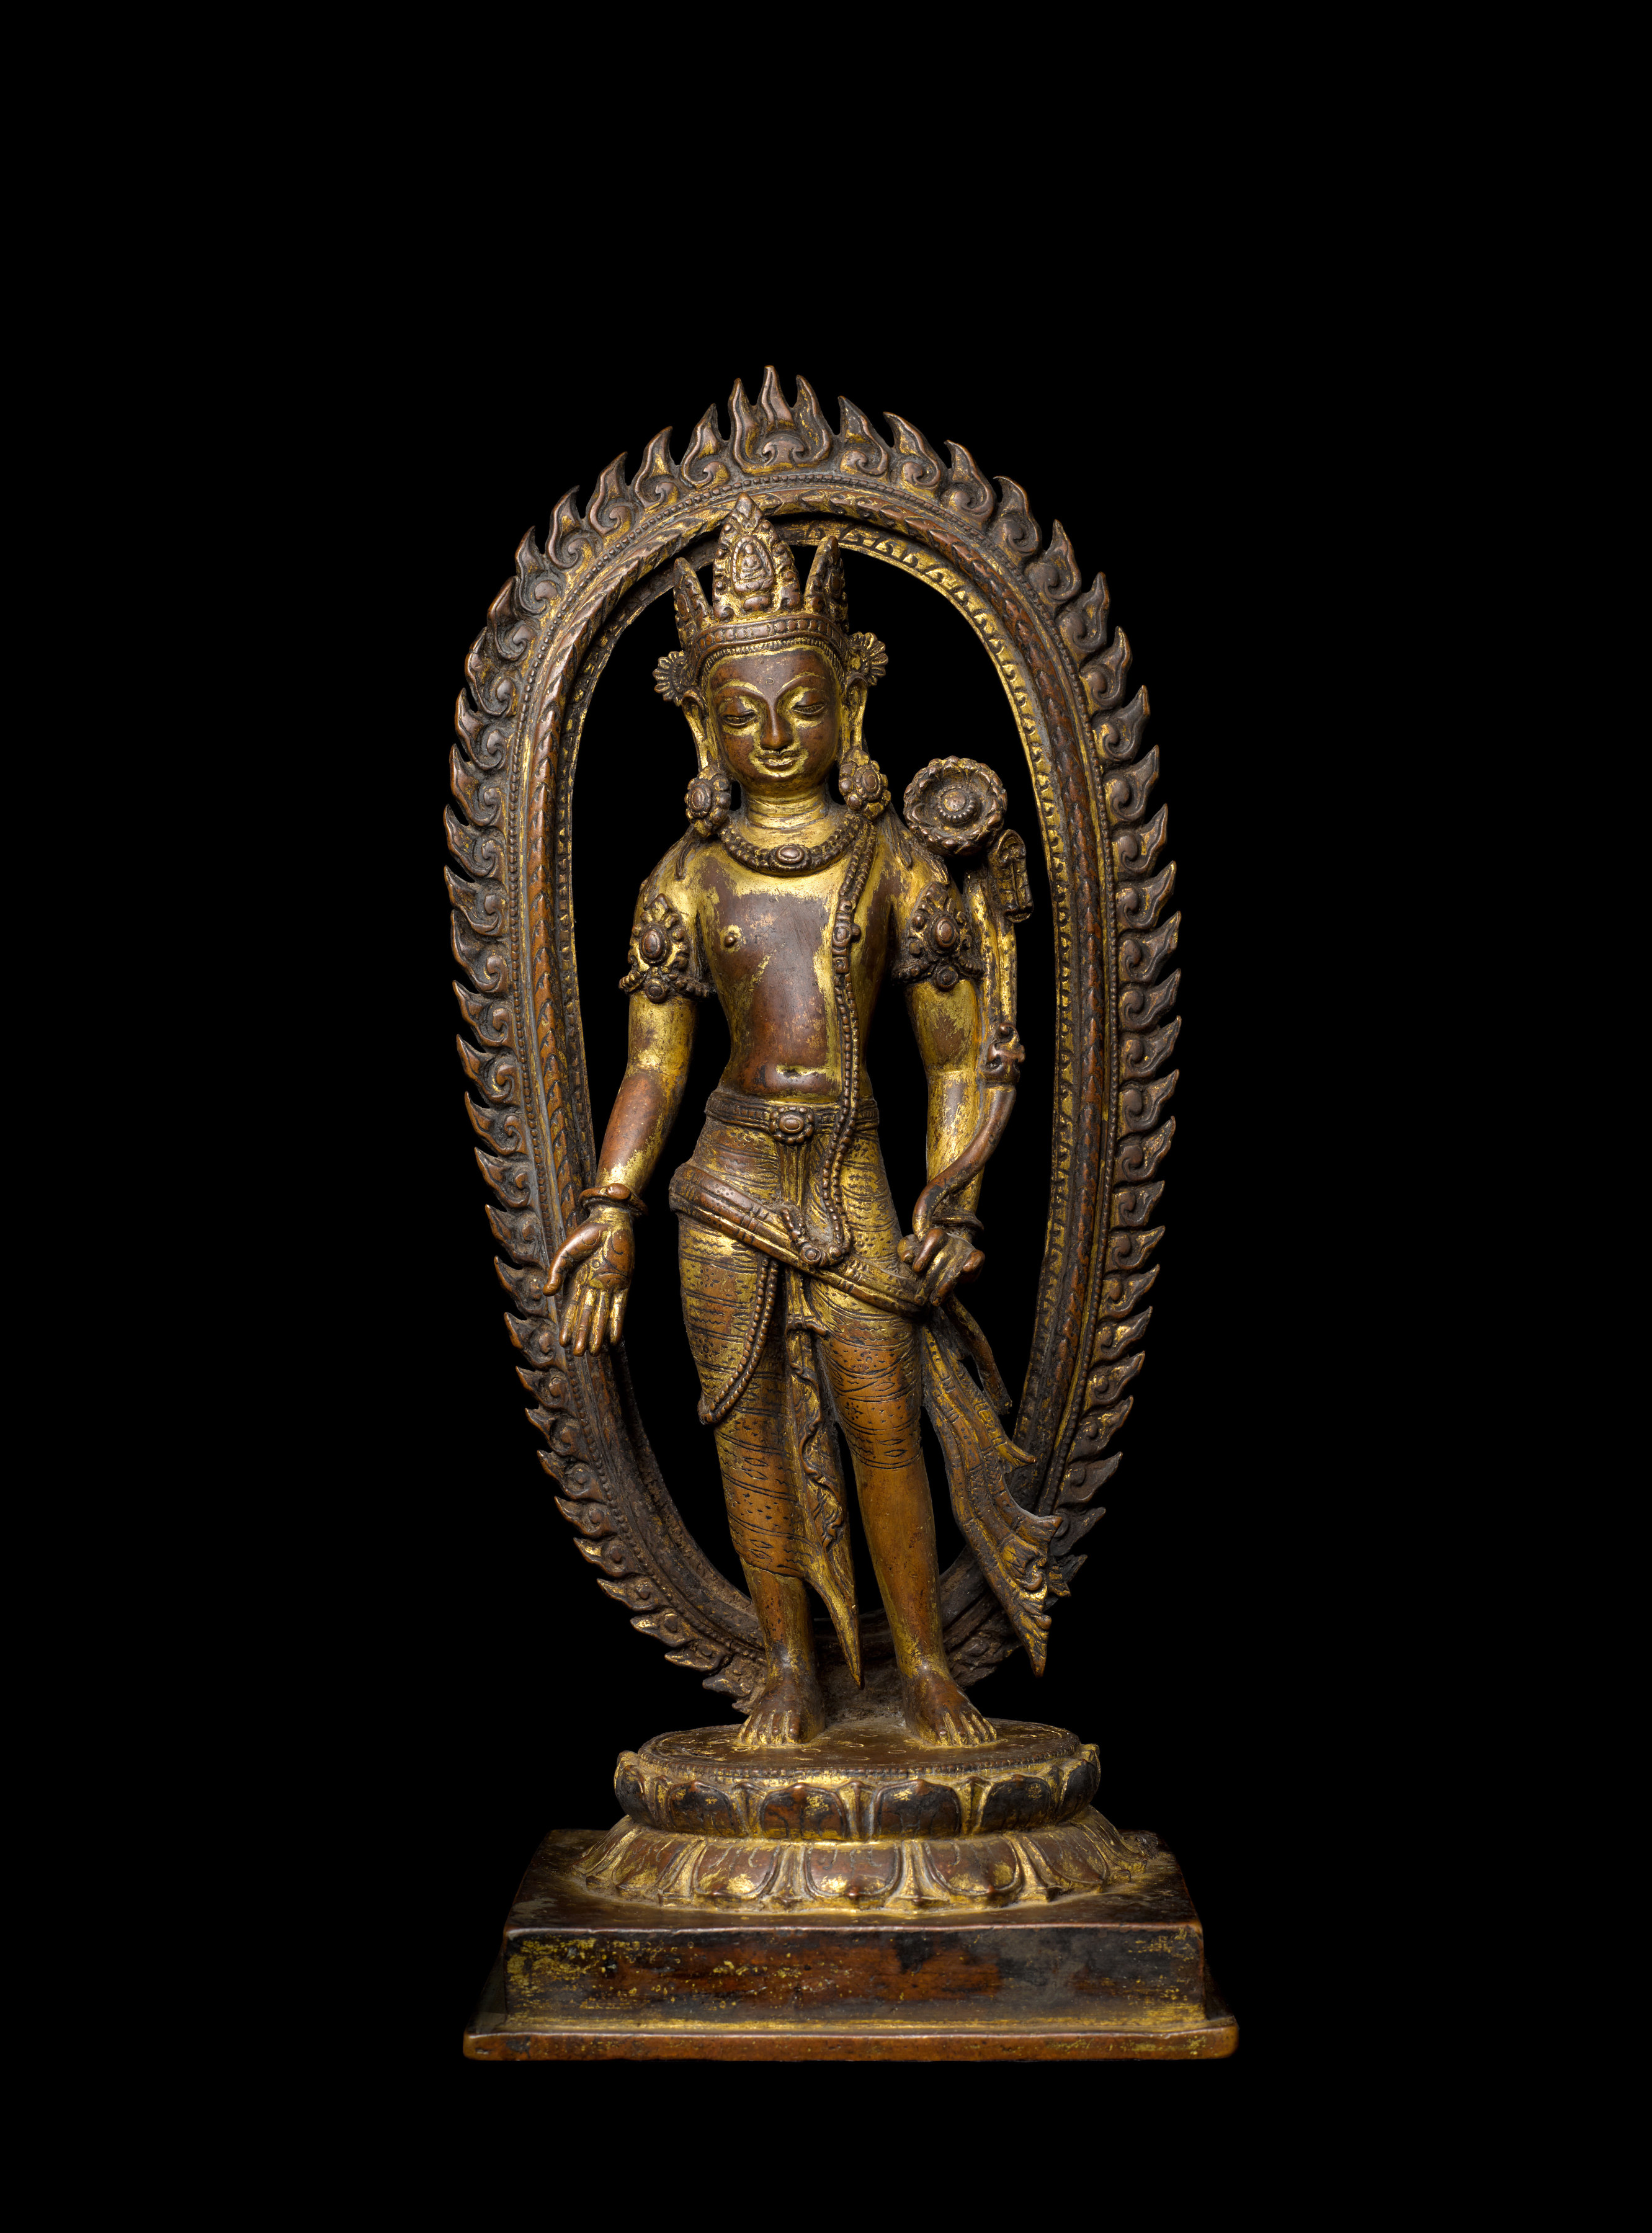 This figure of Padmapani is a fine and unusually complete example of a classic type of Nepalese sculpture that depicts standing bodhisattvas